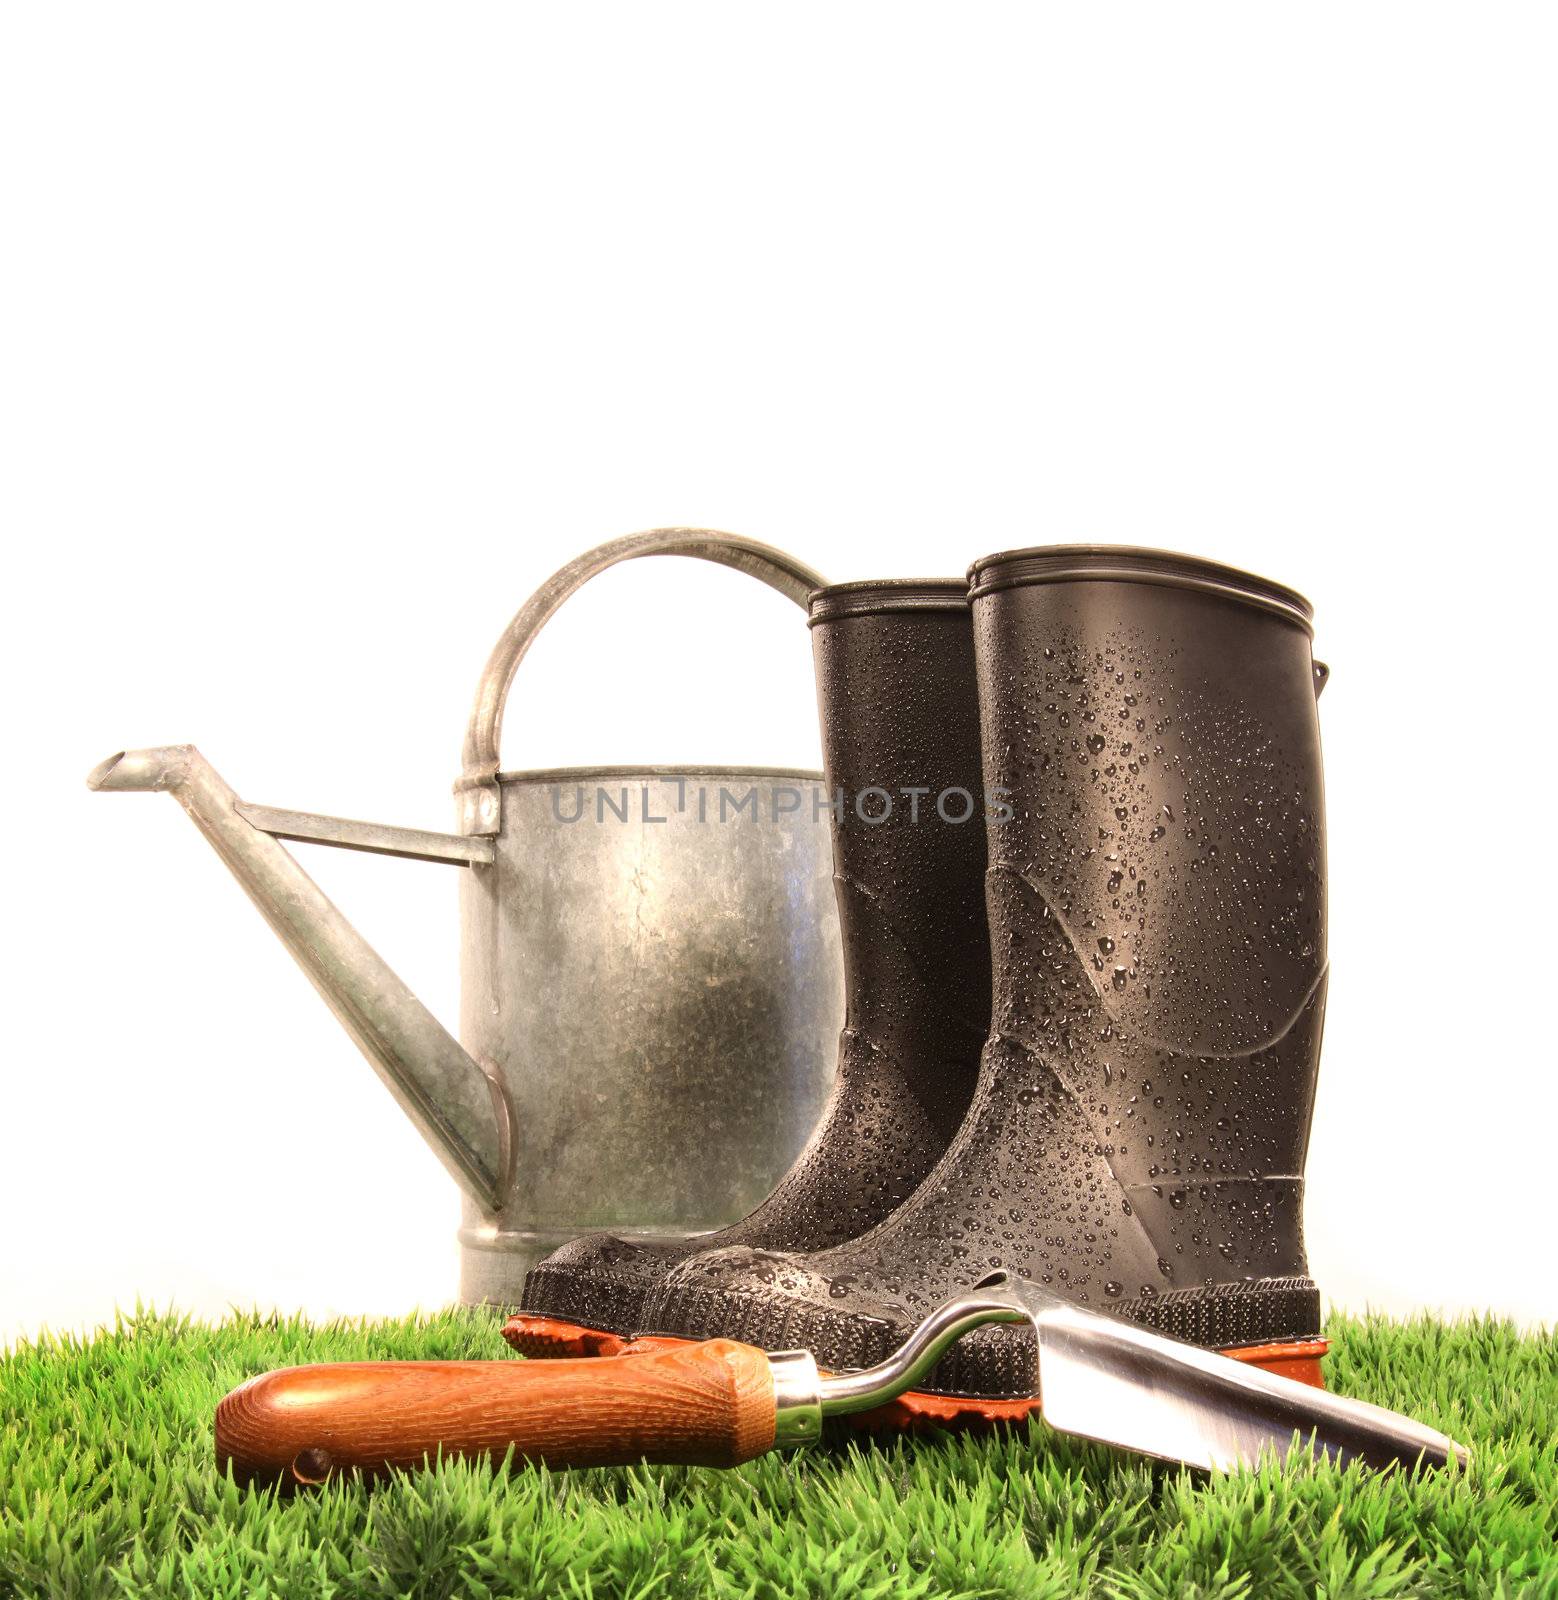 Garden boots with tool and watering can  by Sandralise